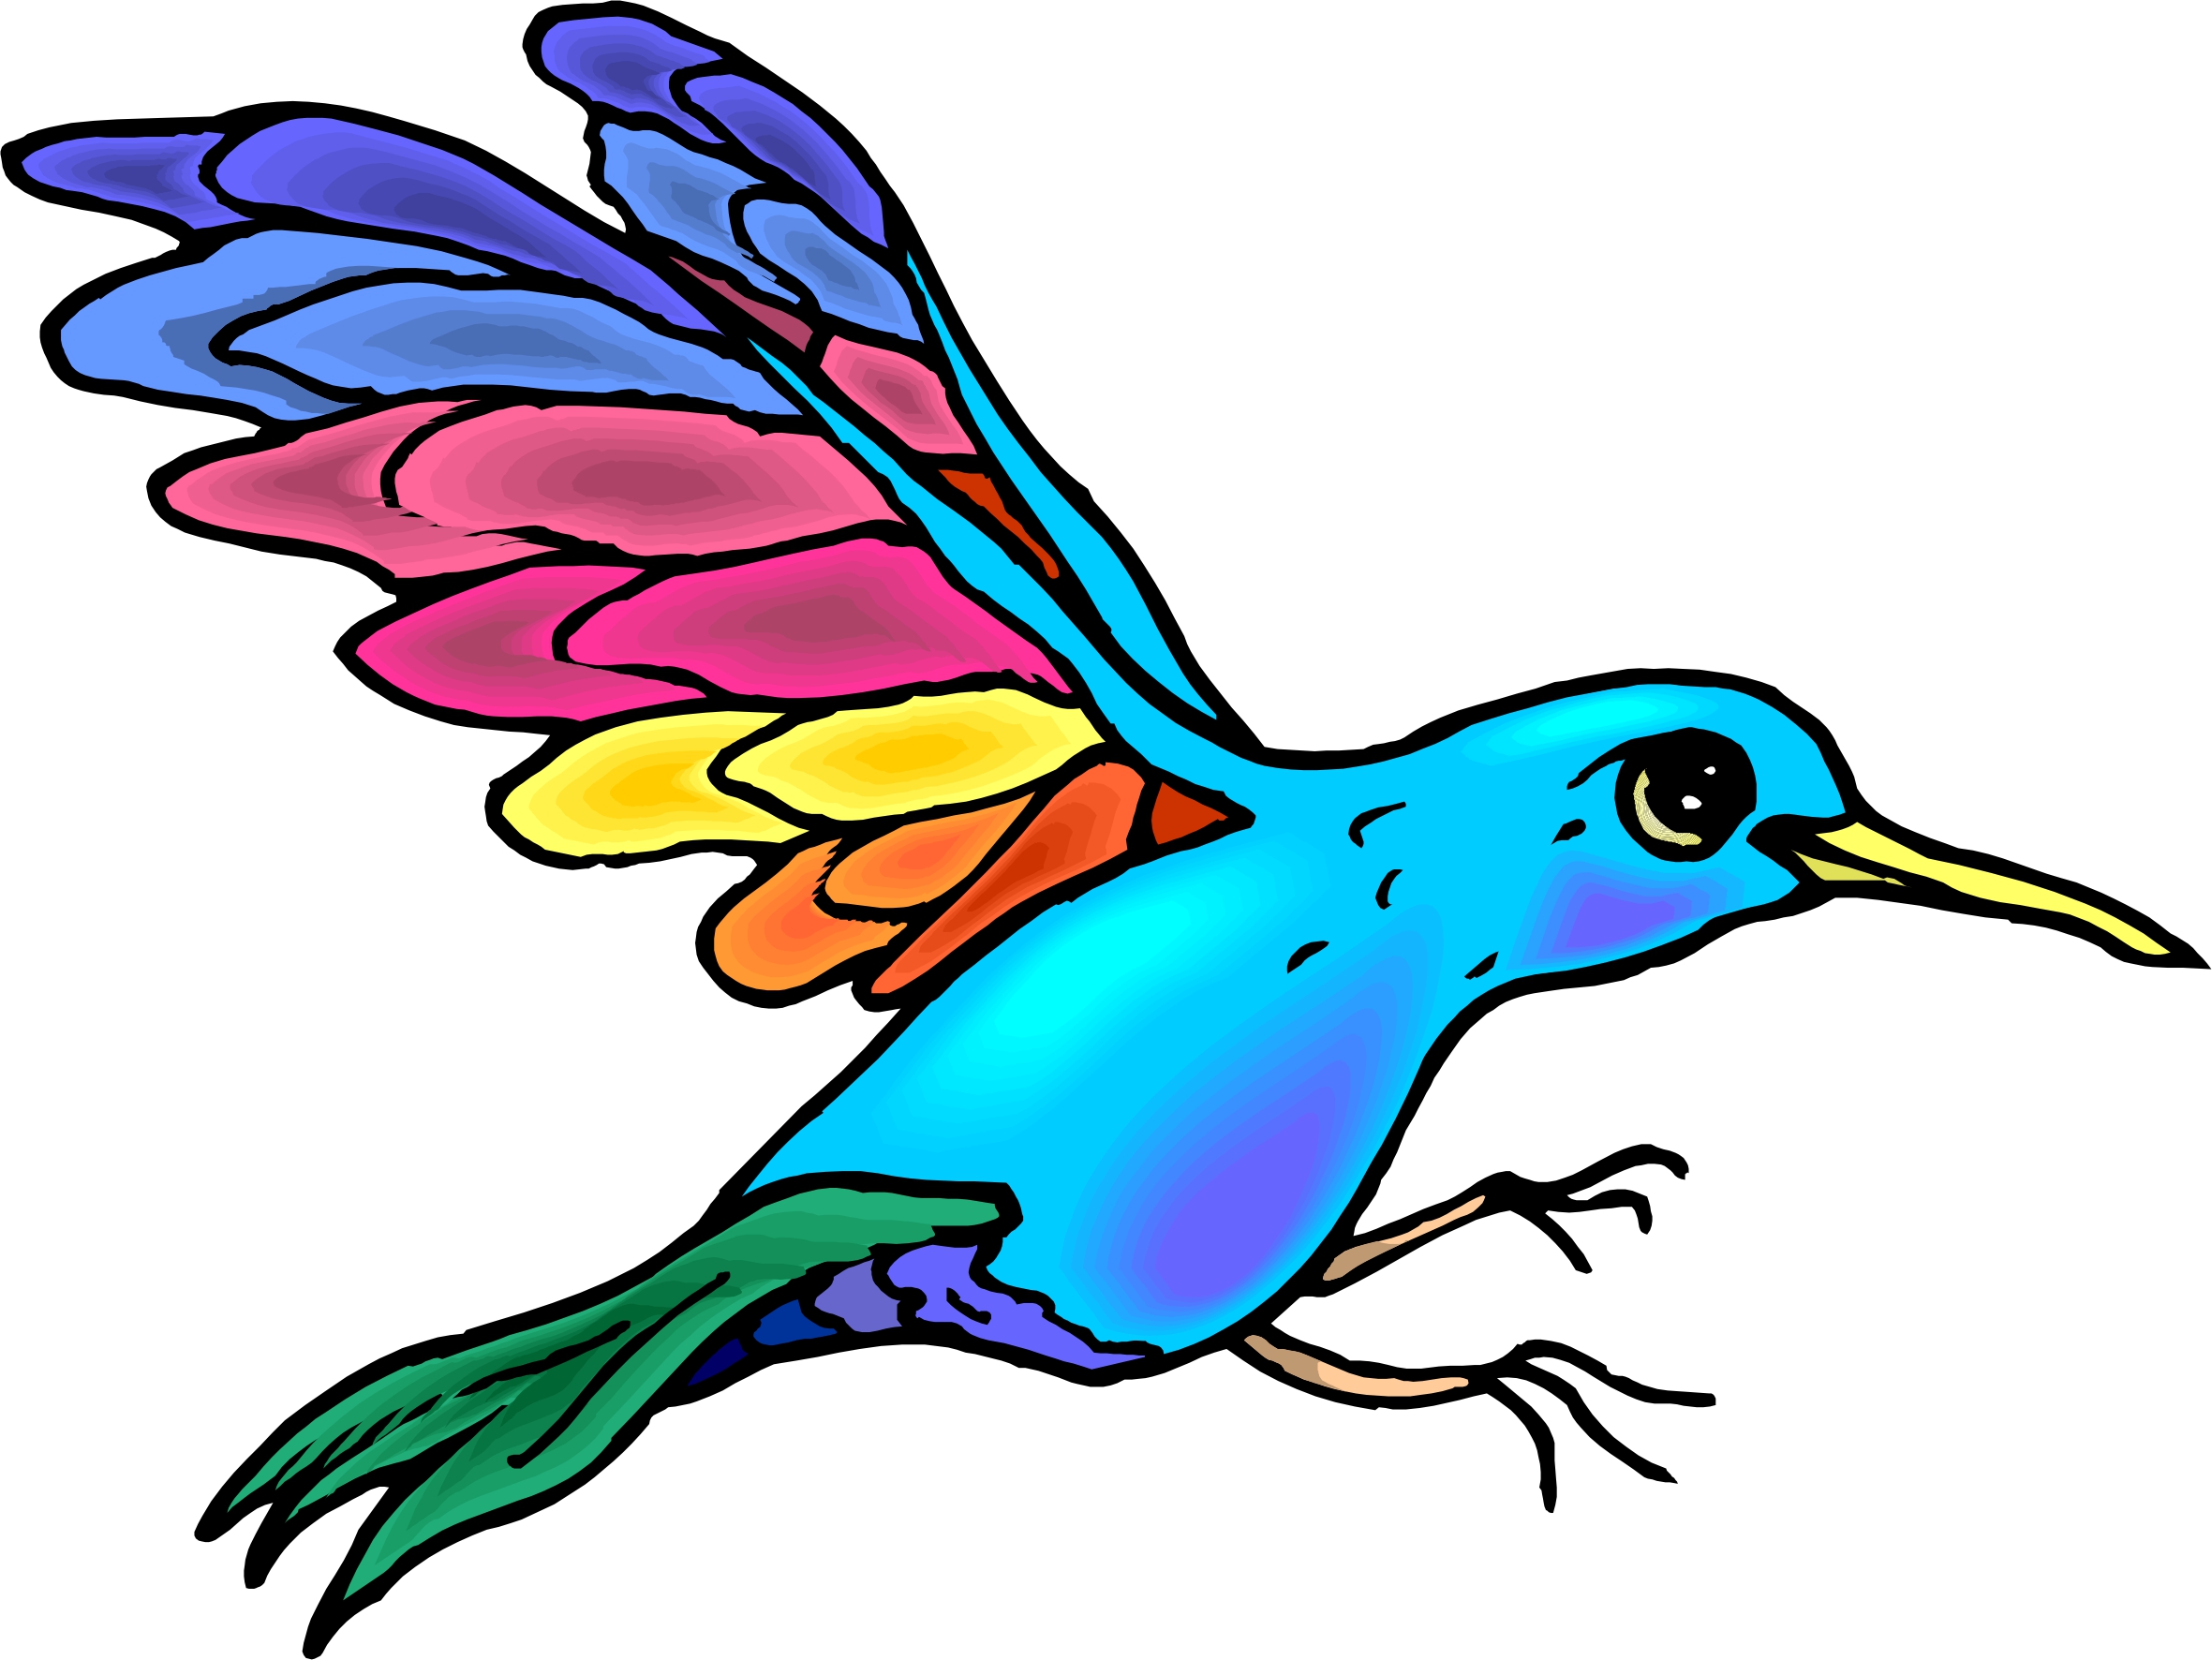 Birds animated images - ClipArt Best - ClipArt Best